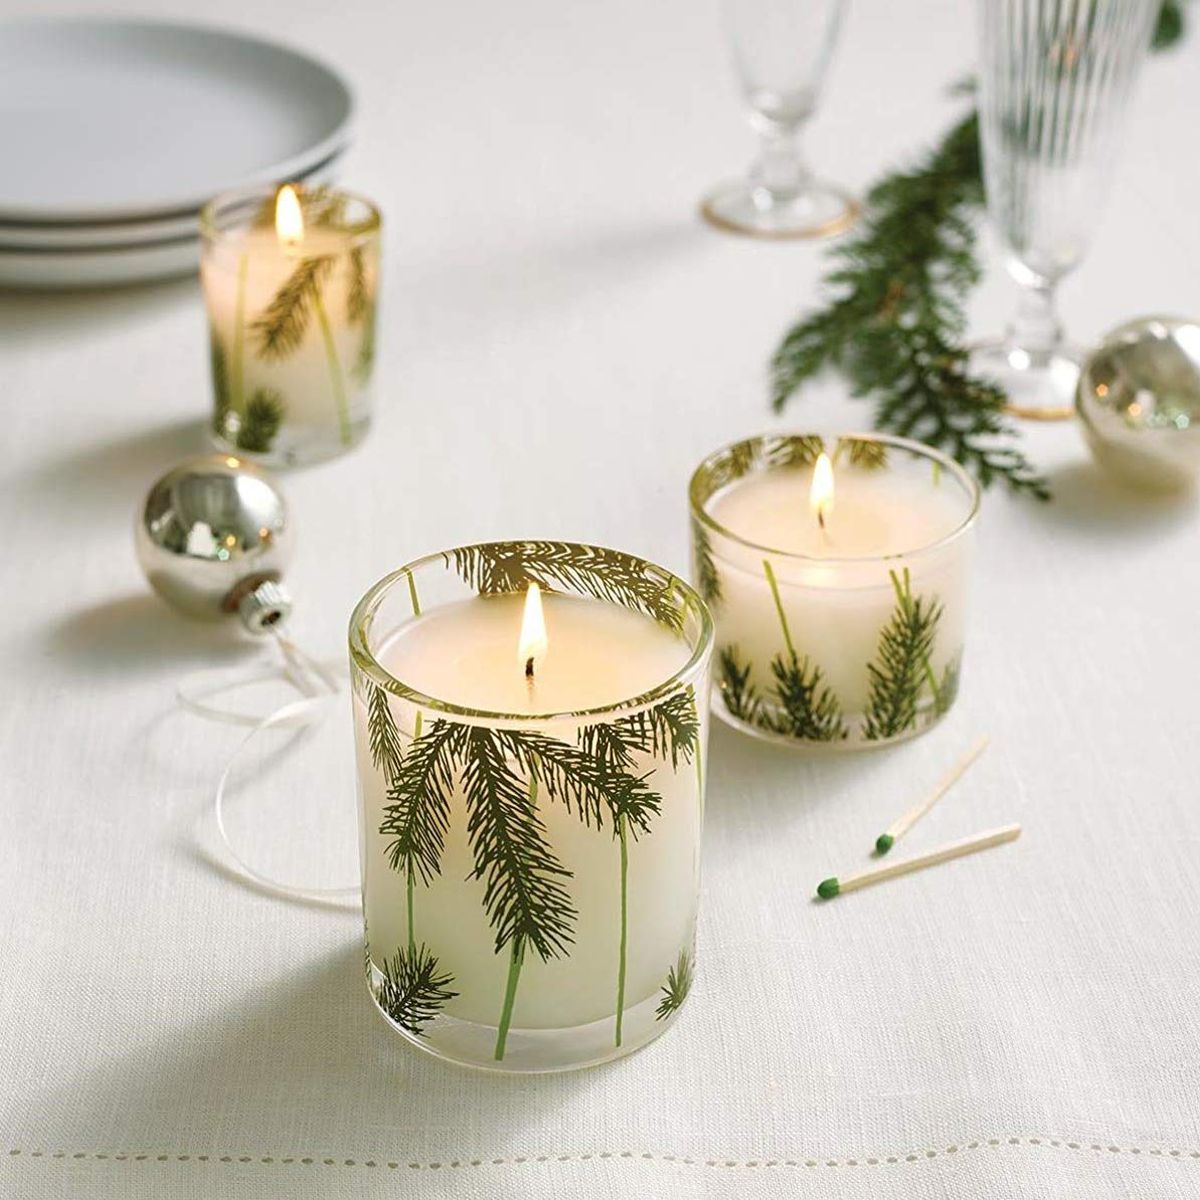 Two jar candles with evergreen print on the containers sit on a table. 